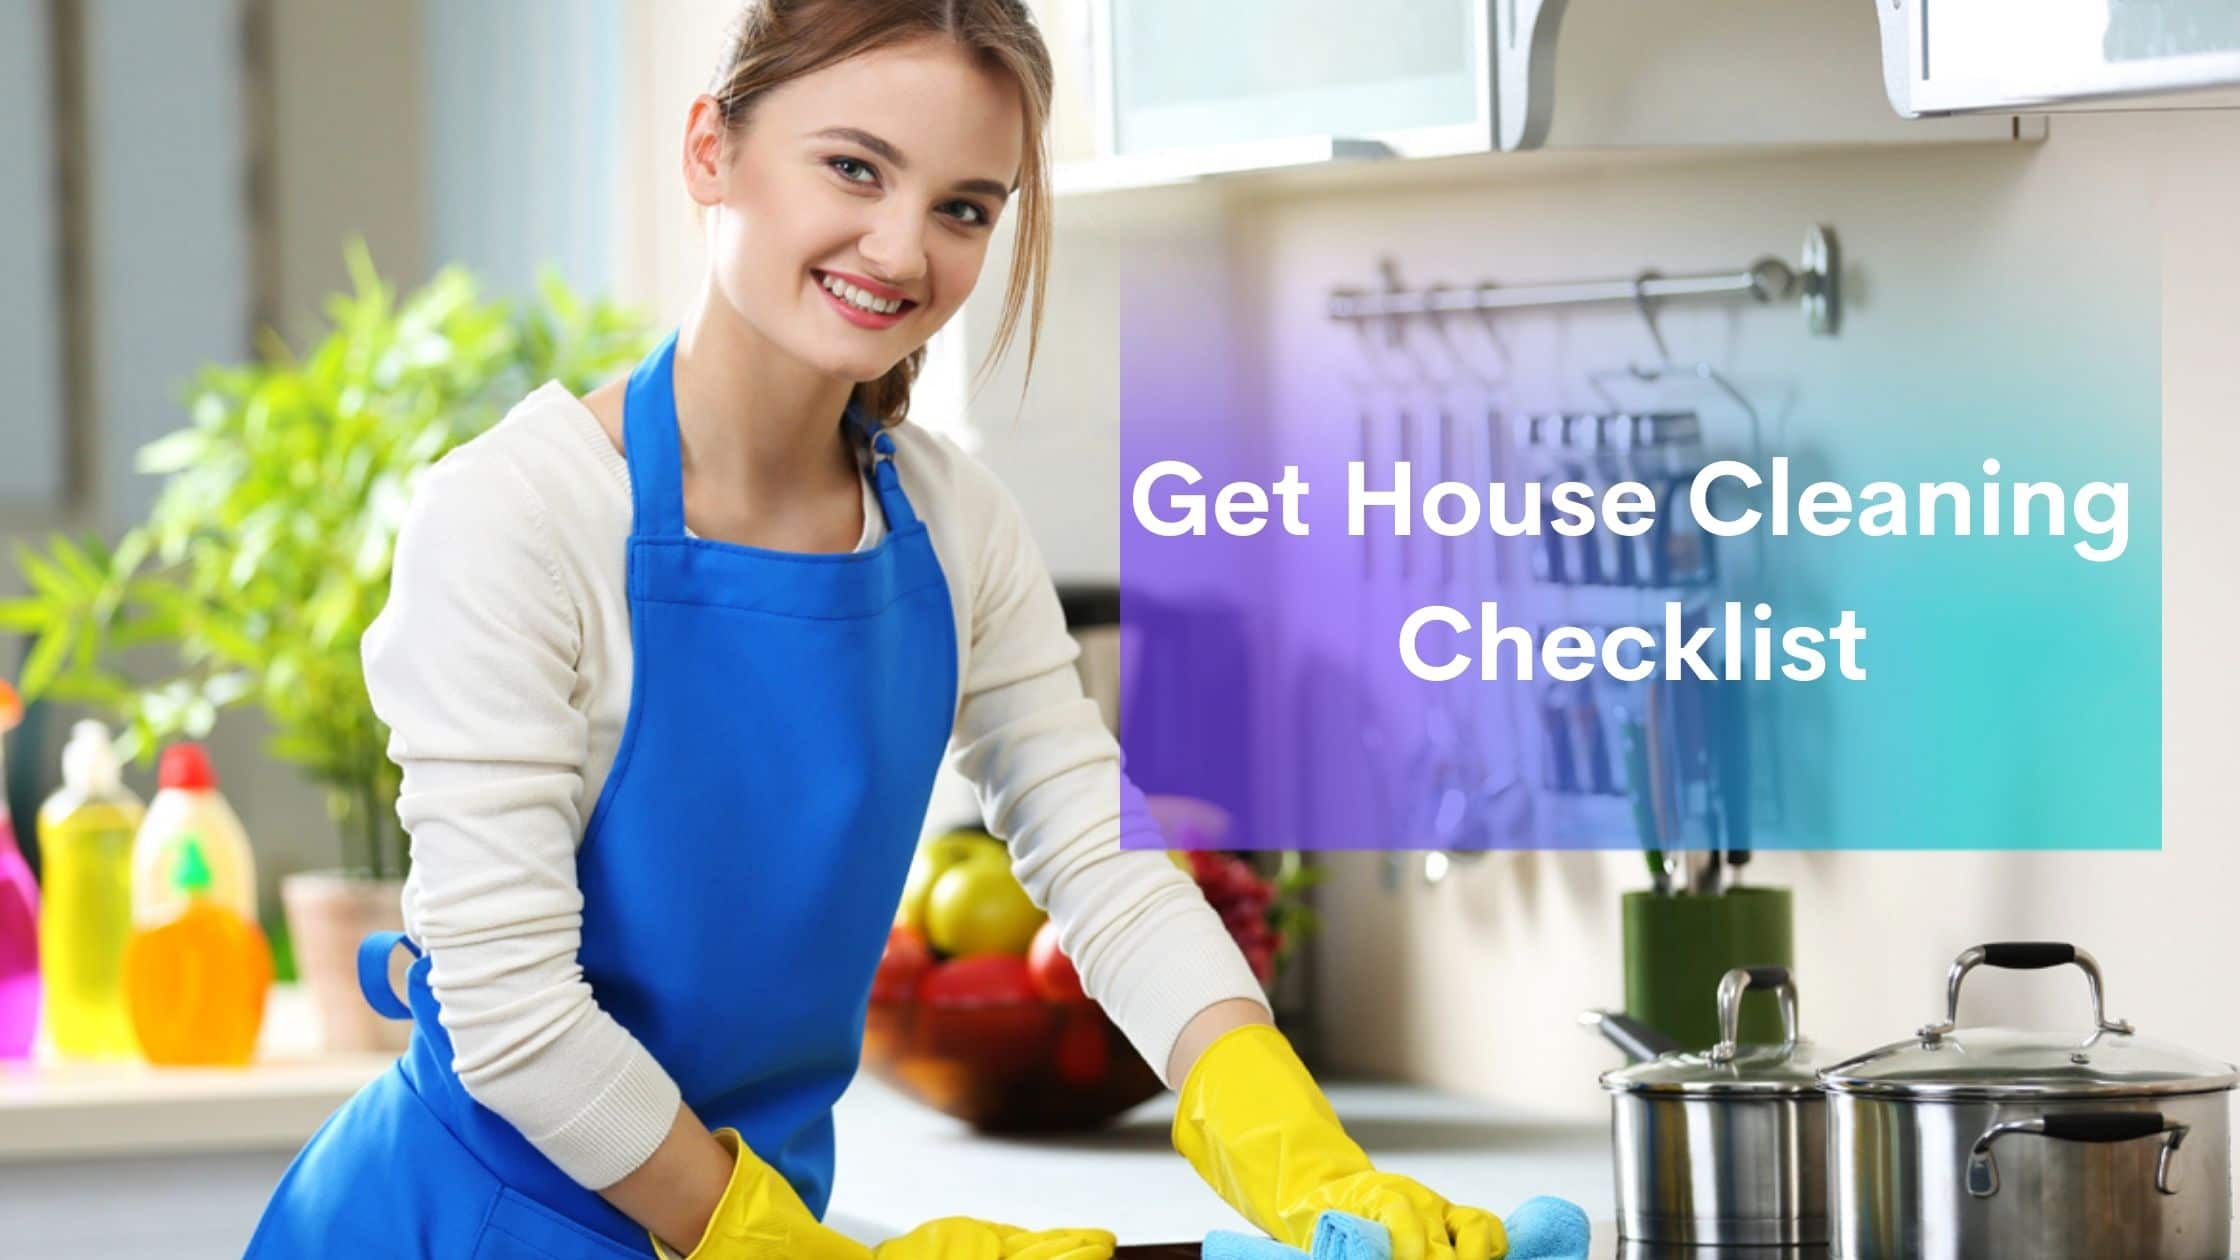 Get House Cleaning Checklist